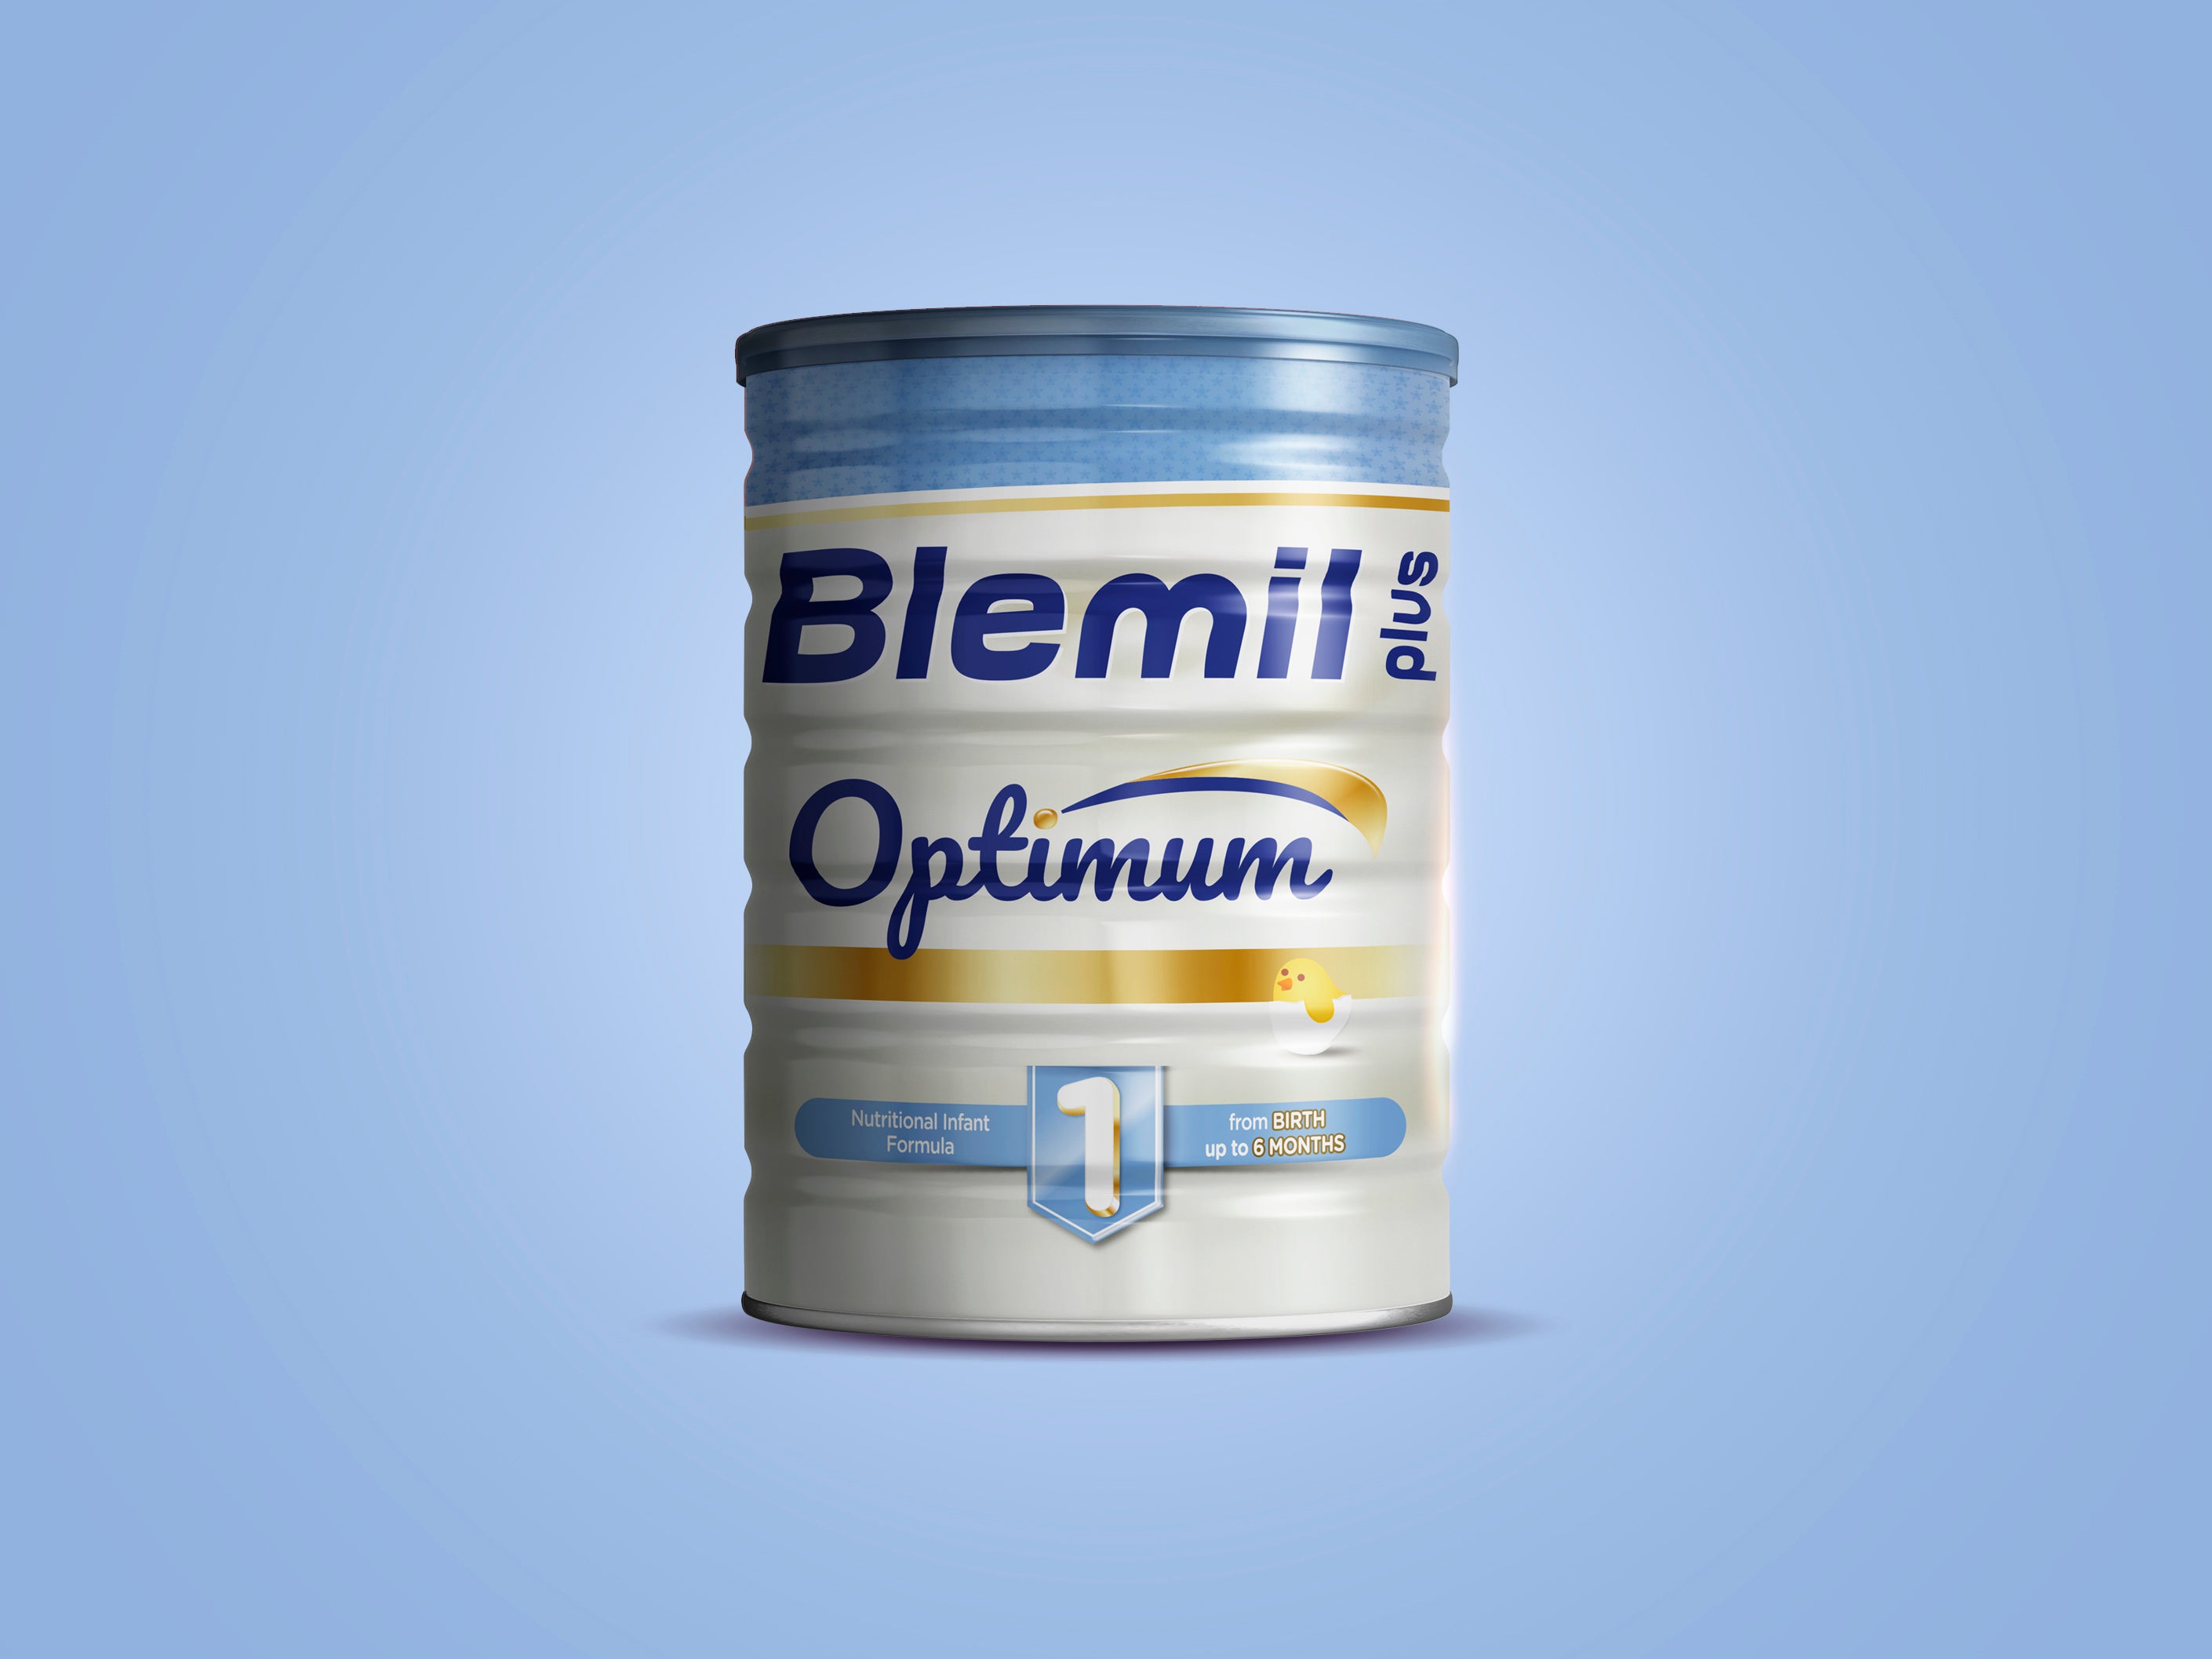 Blemil - Product discounts and offers